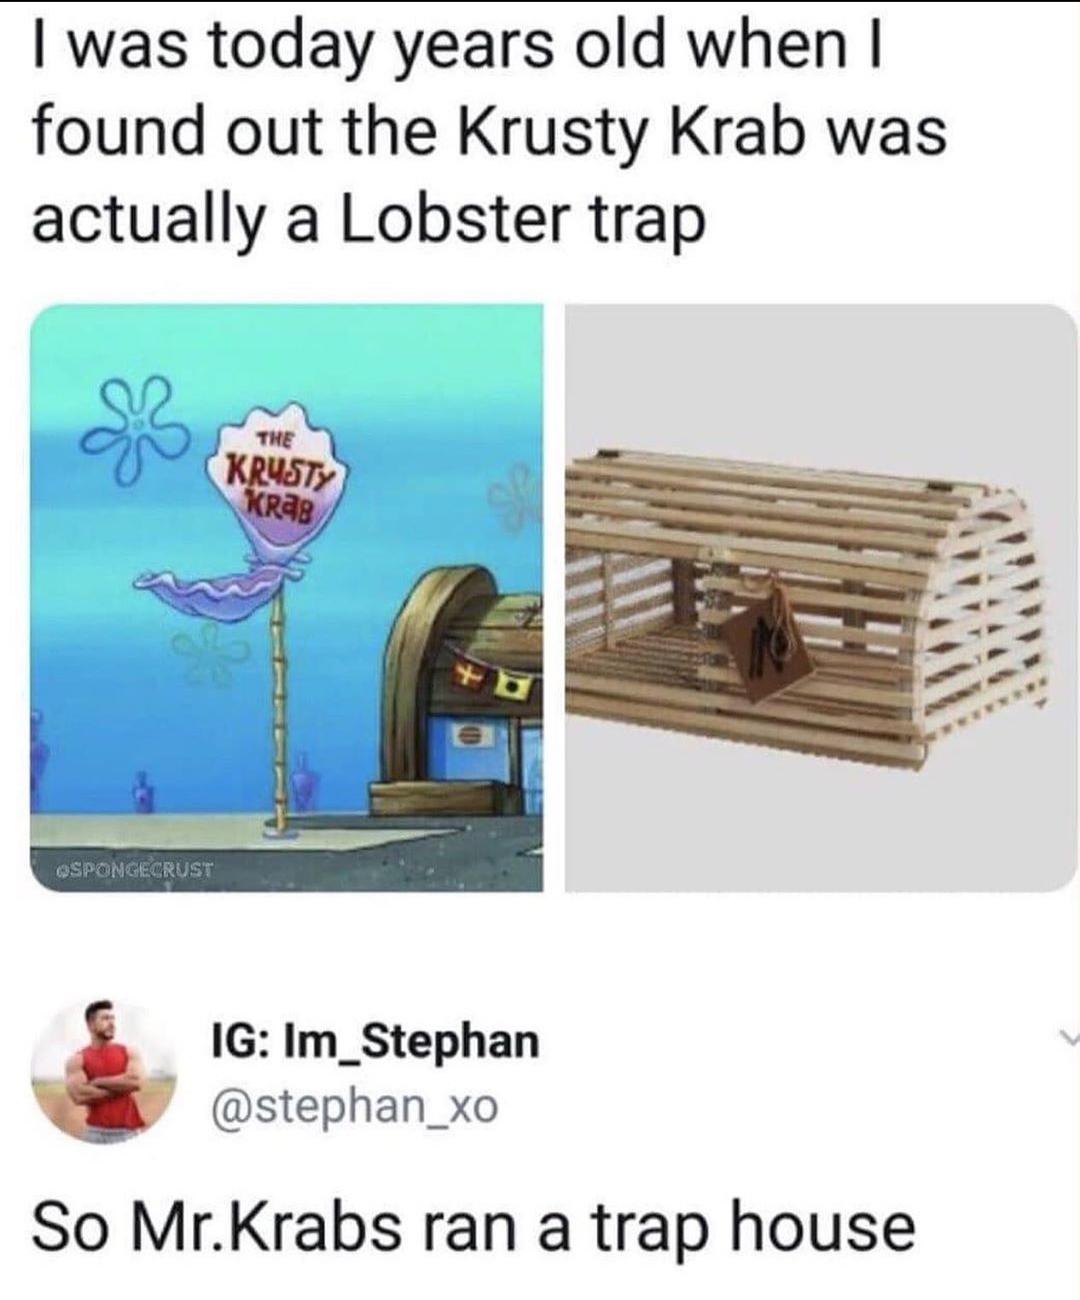 today years old meme - I was today years old when | found out the Krusty Krab was actually a Lobster trap The Krysty KRA8 Qspongecrust Ig Im_Stephan So Mr.Krabs ran a trap house